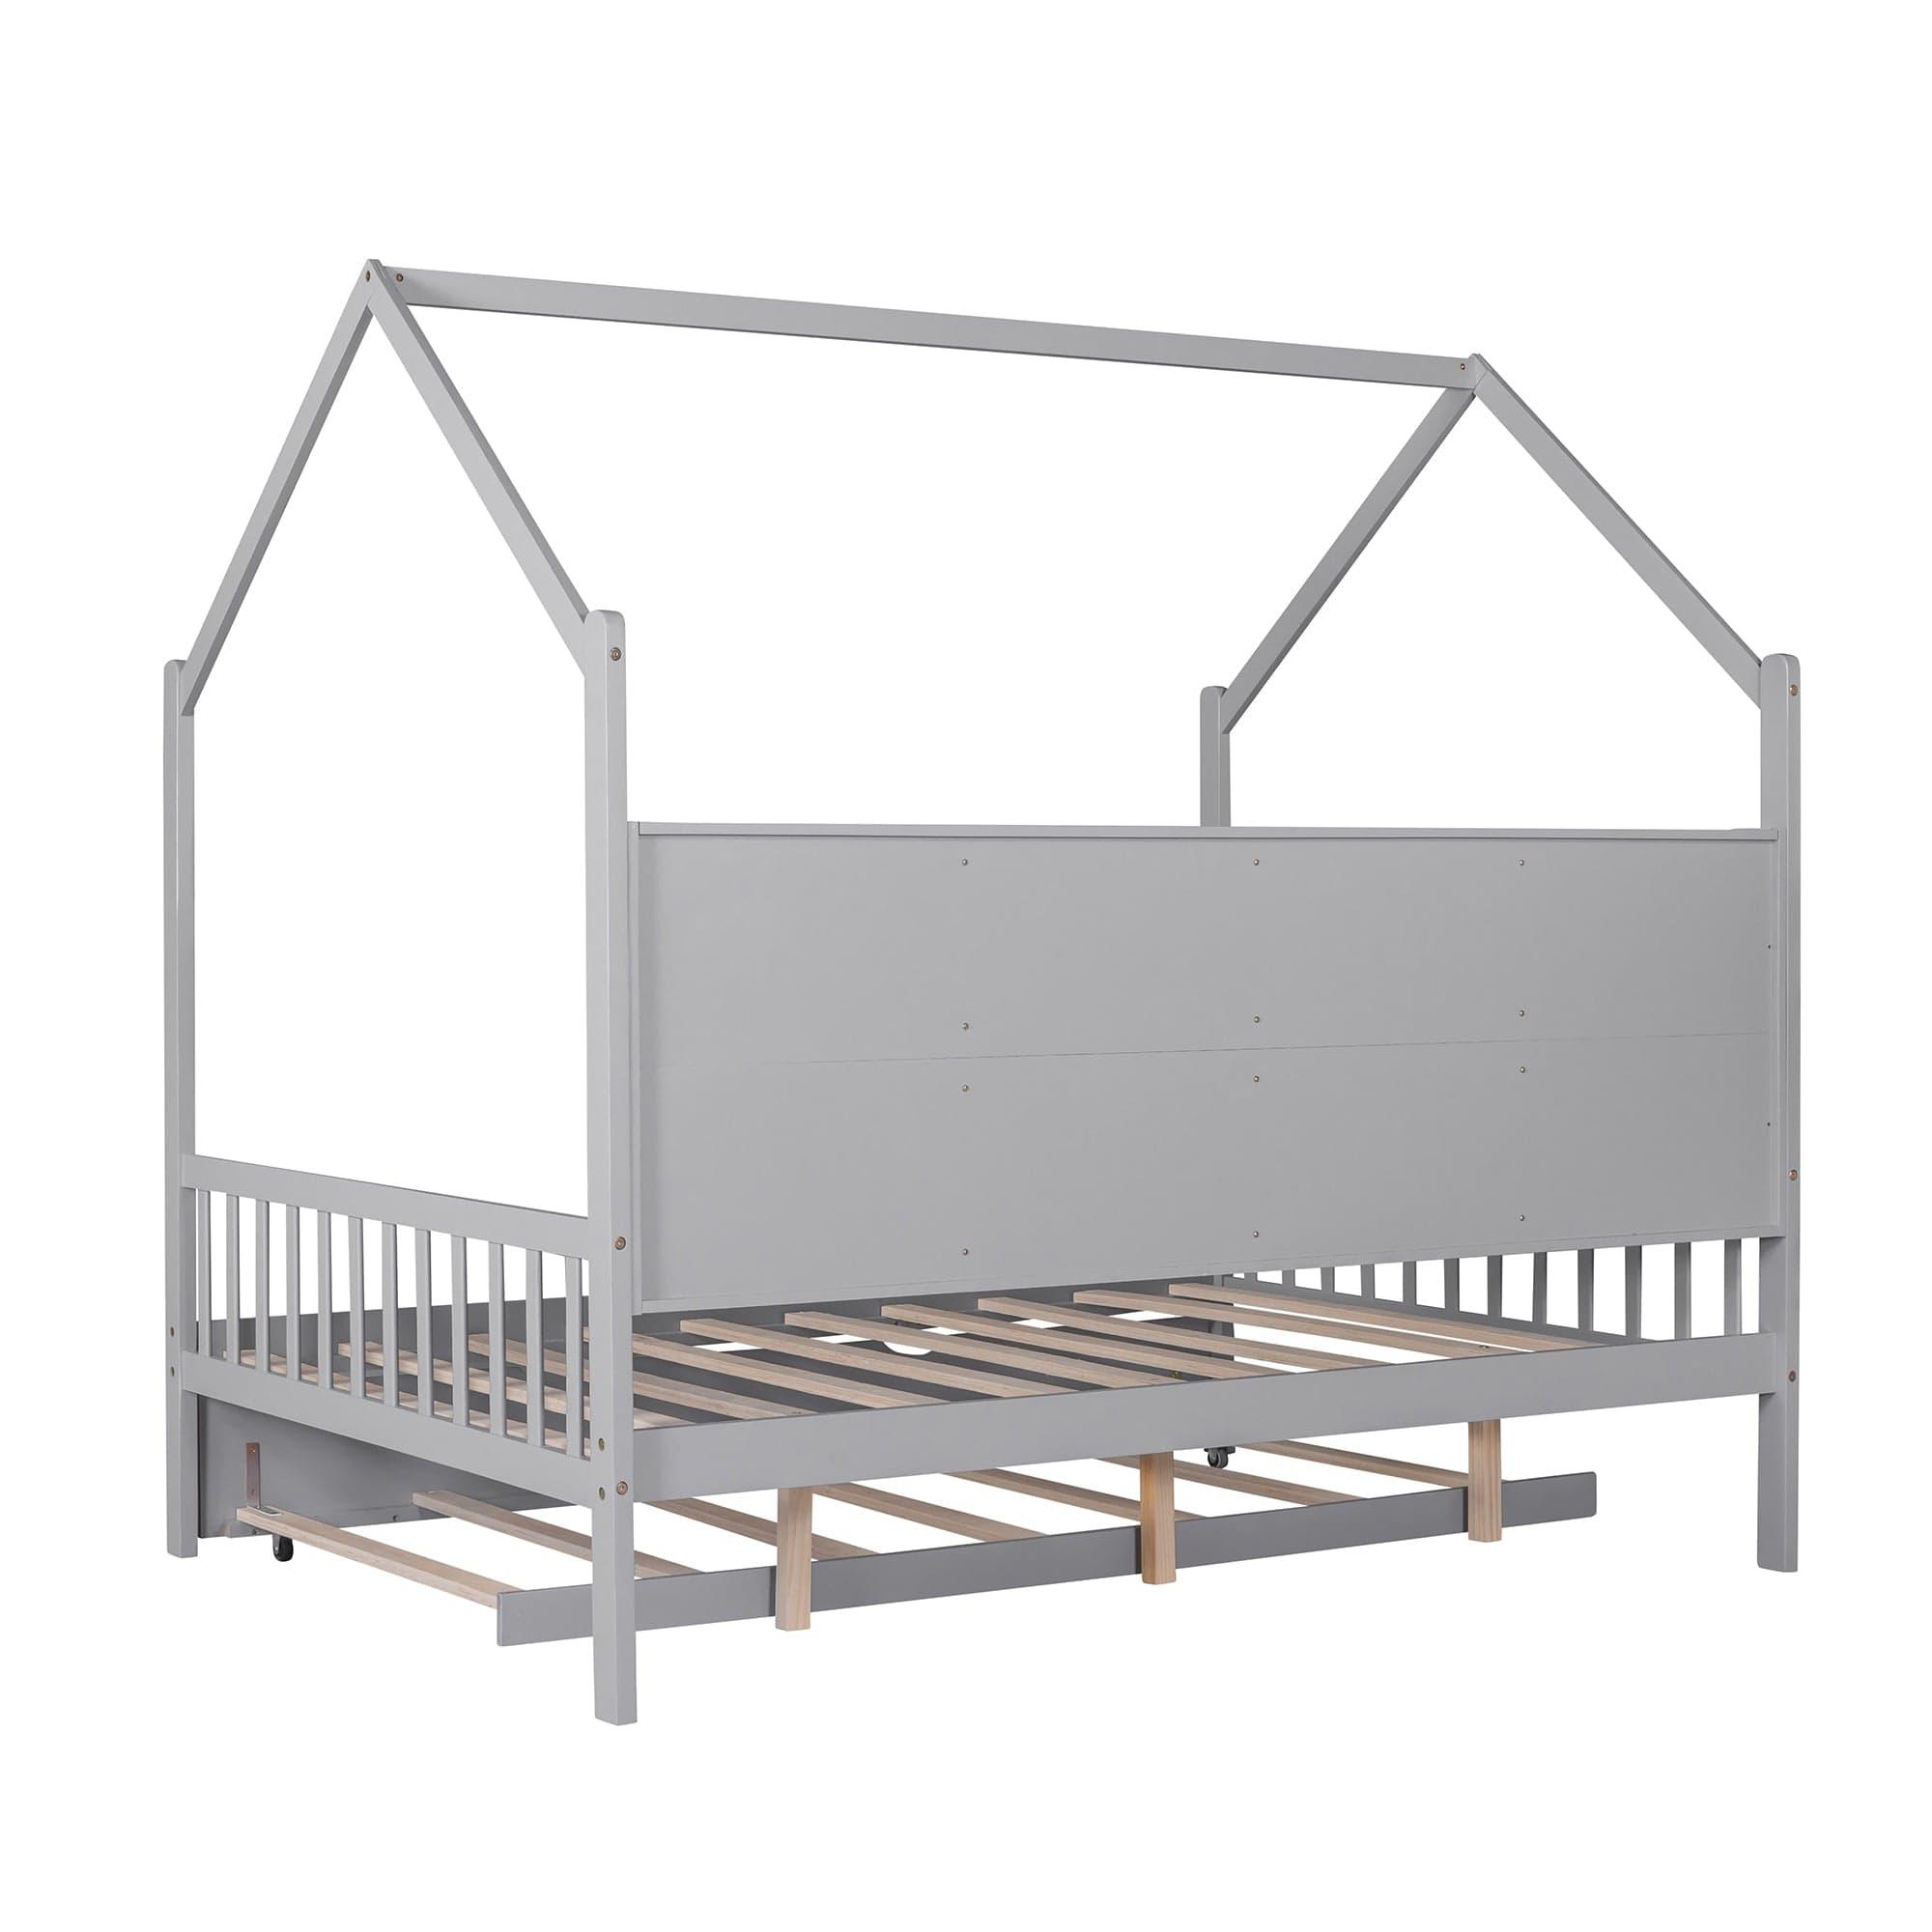 Shop Wooden Full Size House Bed with Trundle,Kids Bed with Shelf, Gray Mademoiselle Home Decor